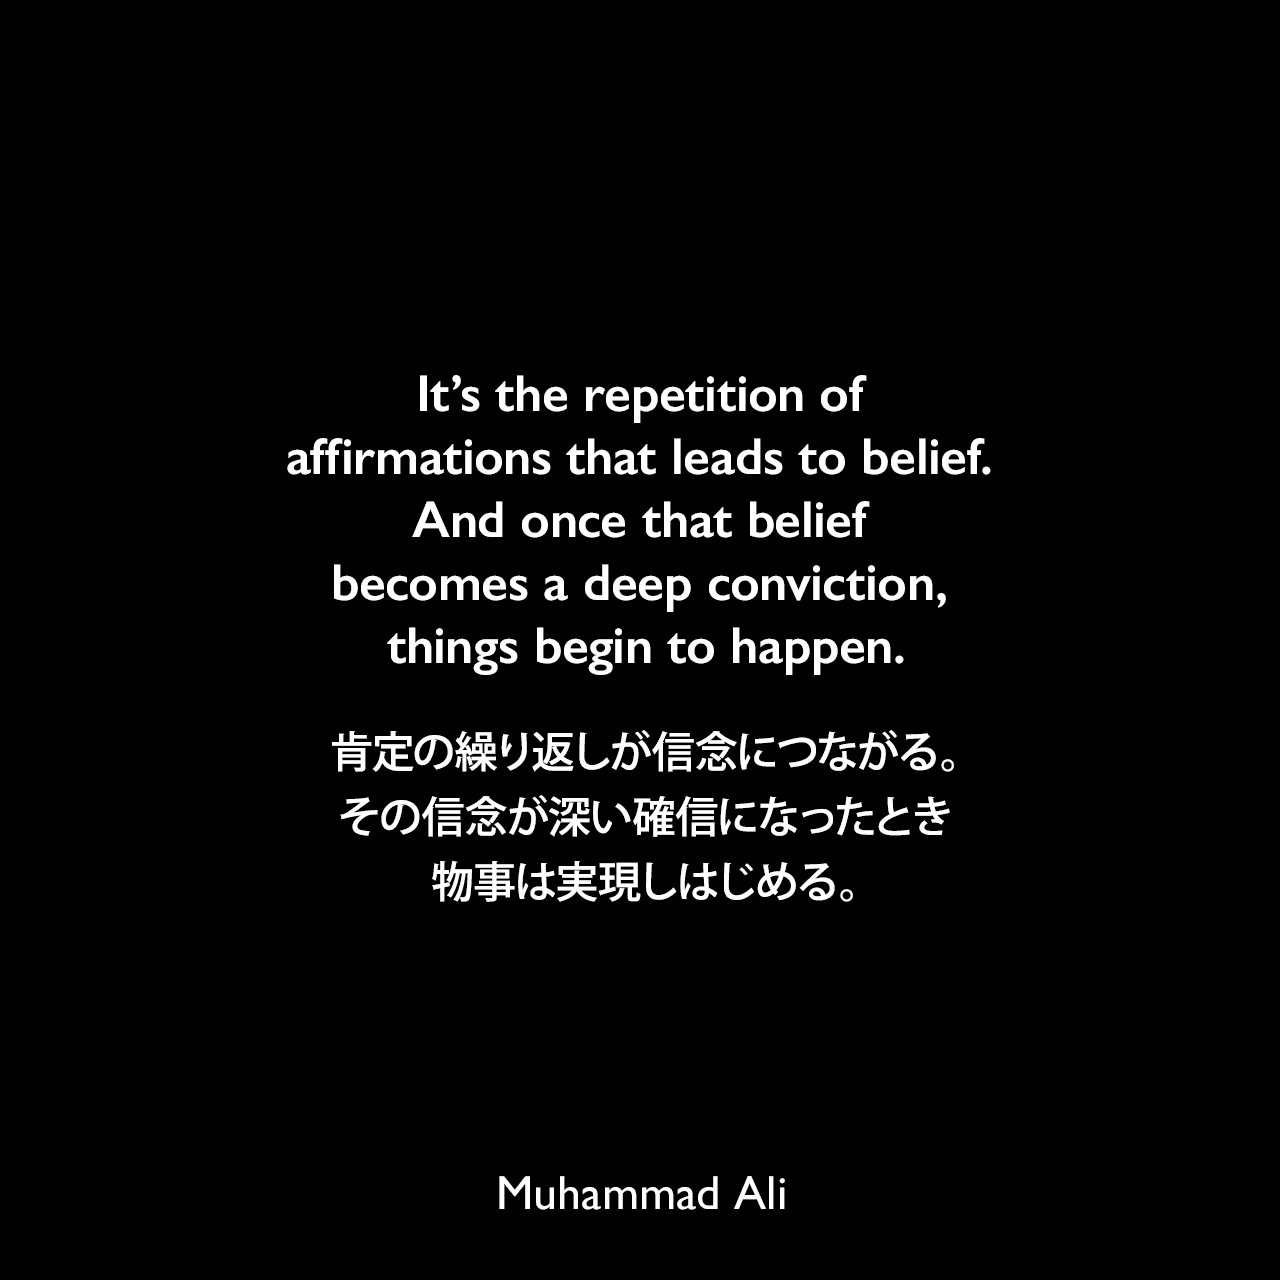 It’s the repetition of affirmations that leads to belief. And once that belief becomes a deep conviction, things begin to happen.肯定の繰り返しが信念につながる。その信念が深い確信になったとき、物事は実現しはじめる。Muhammad Ali